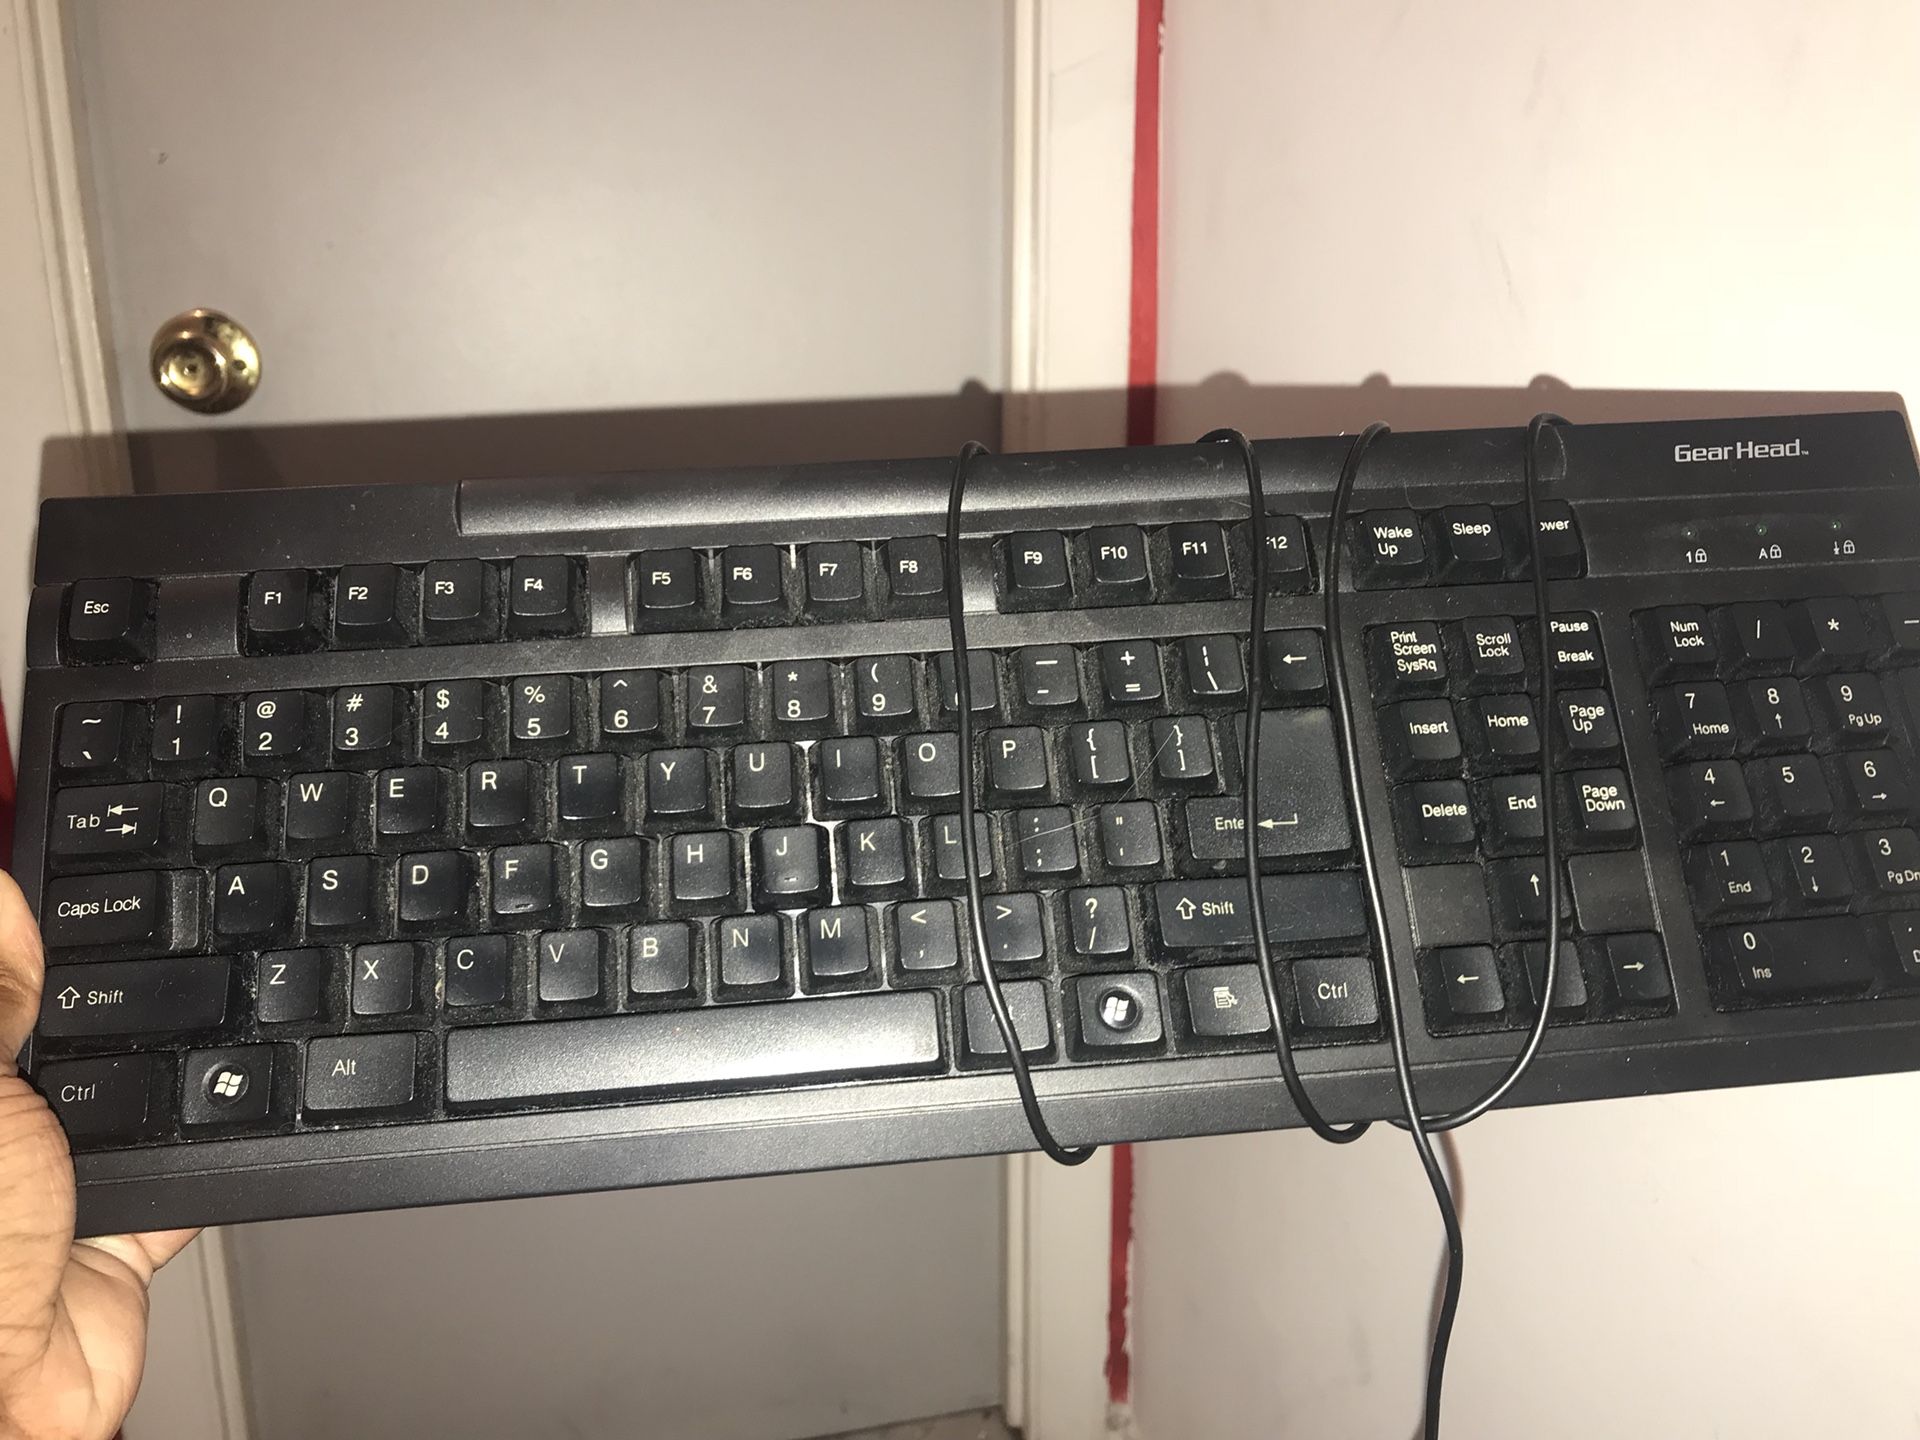 Brand new Gear Head desktop keyboard. I ONLY MEET UP AT POLICE STATIONS.